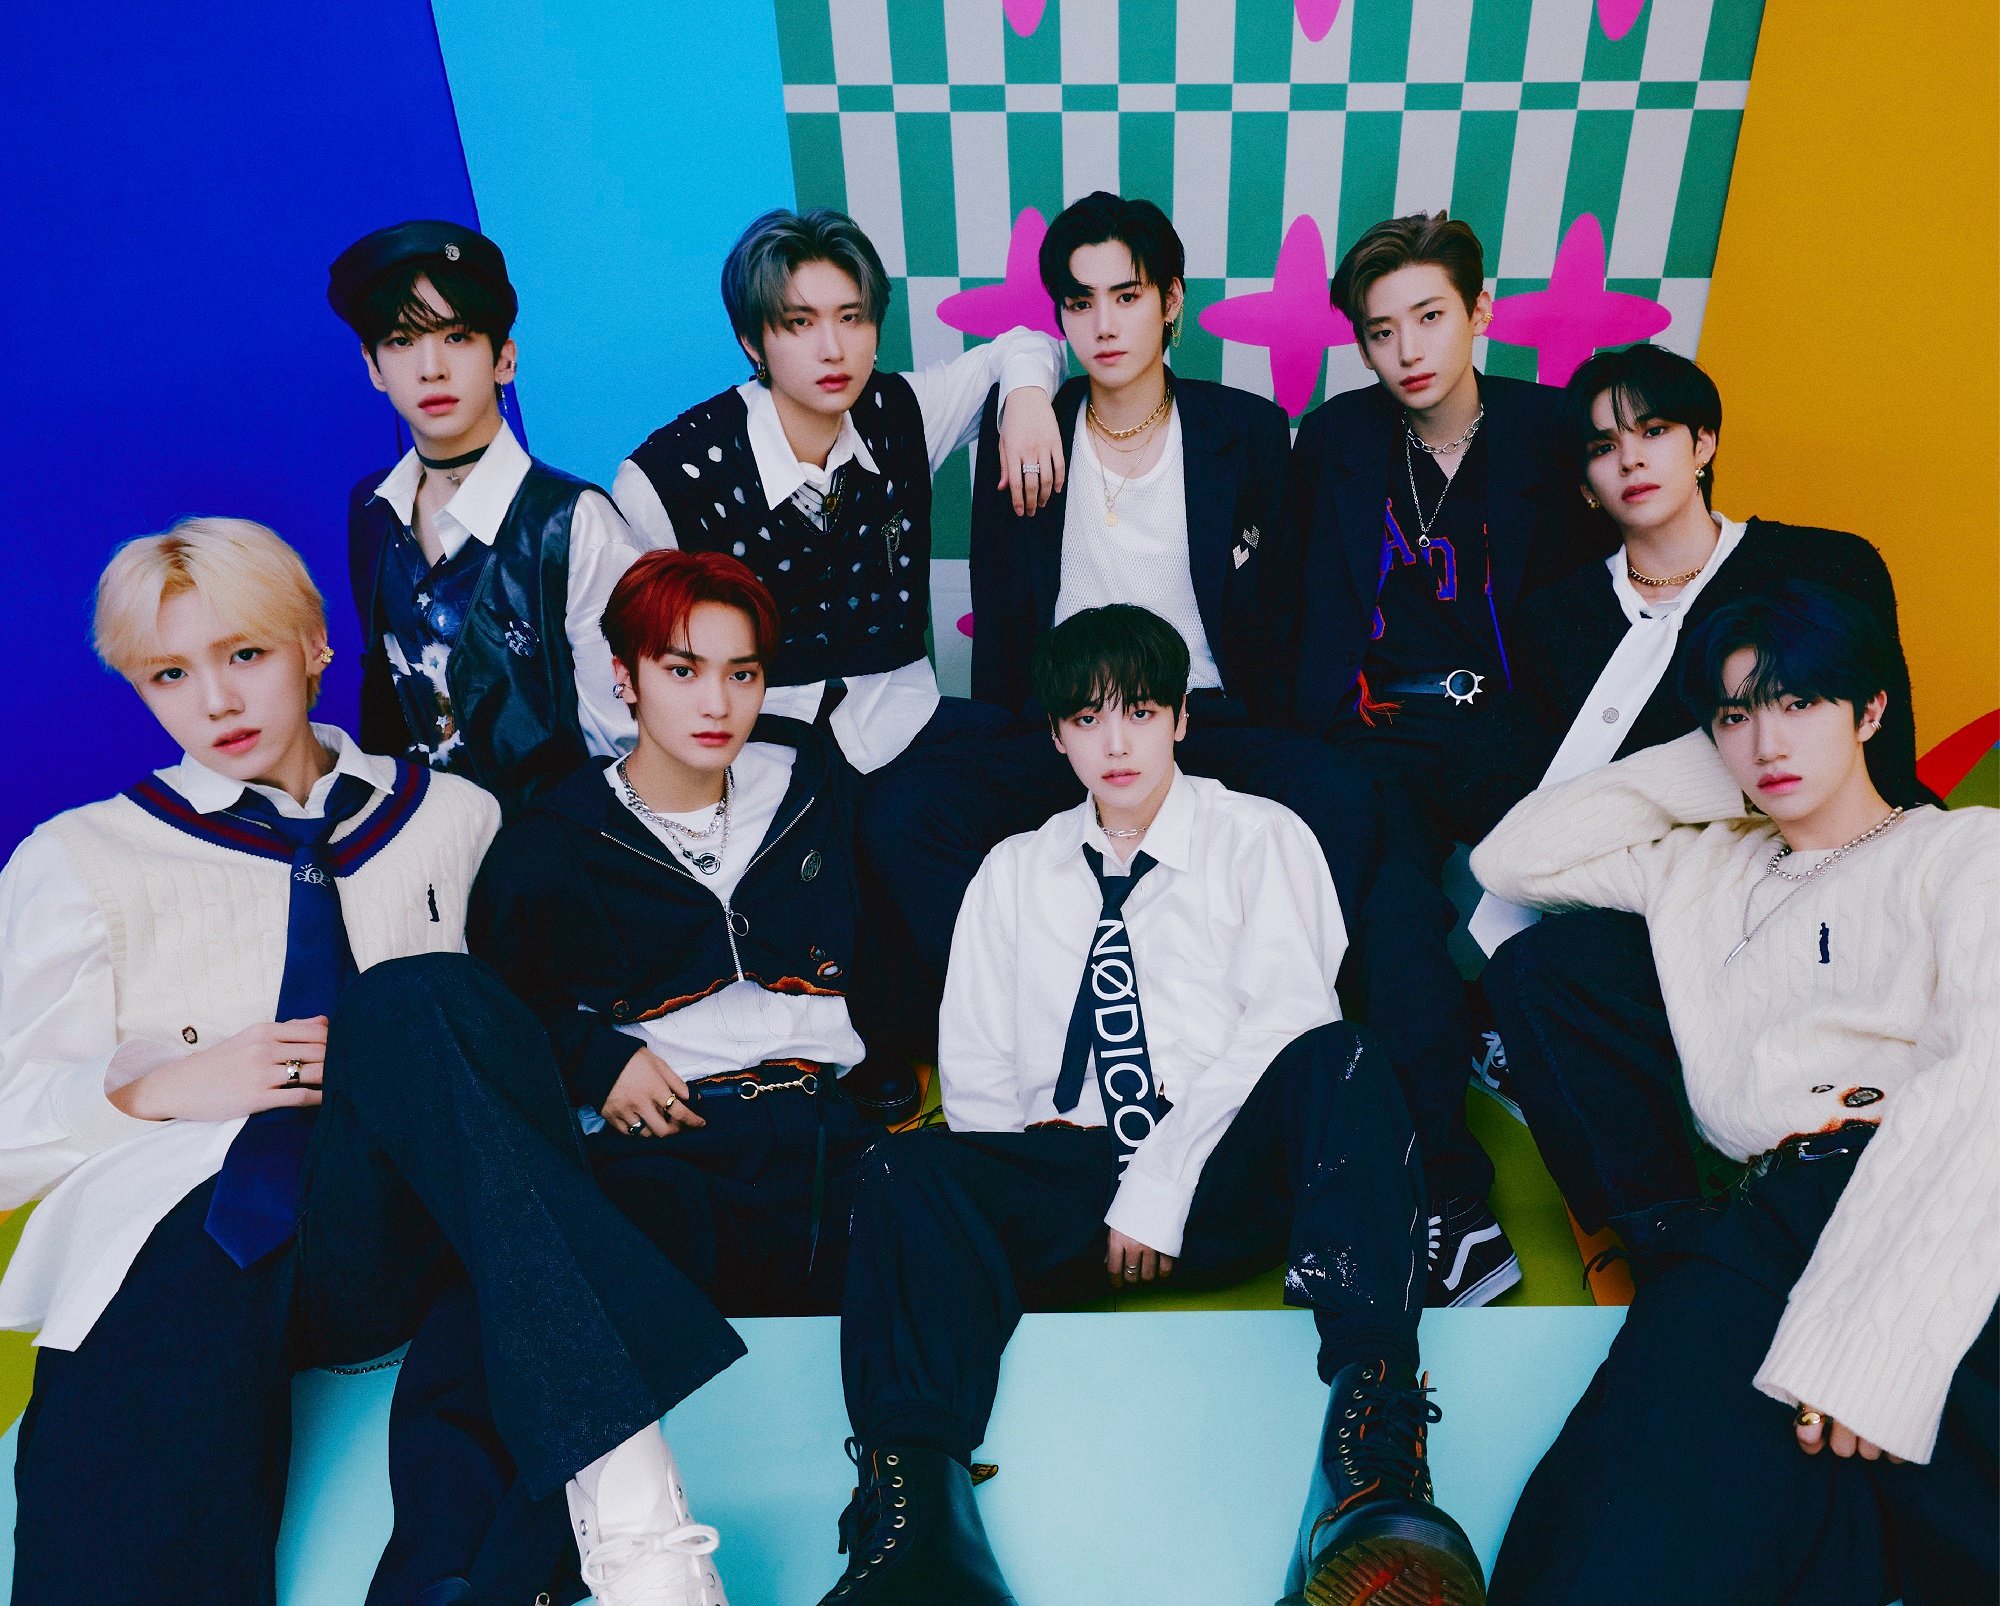 The members of CRAVITY pose in black-and-white outfits in front of a colorful background